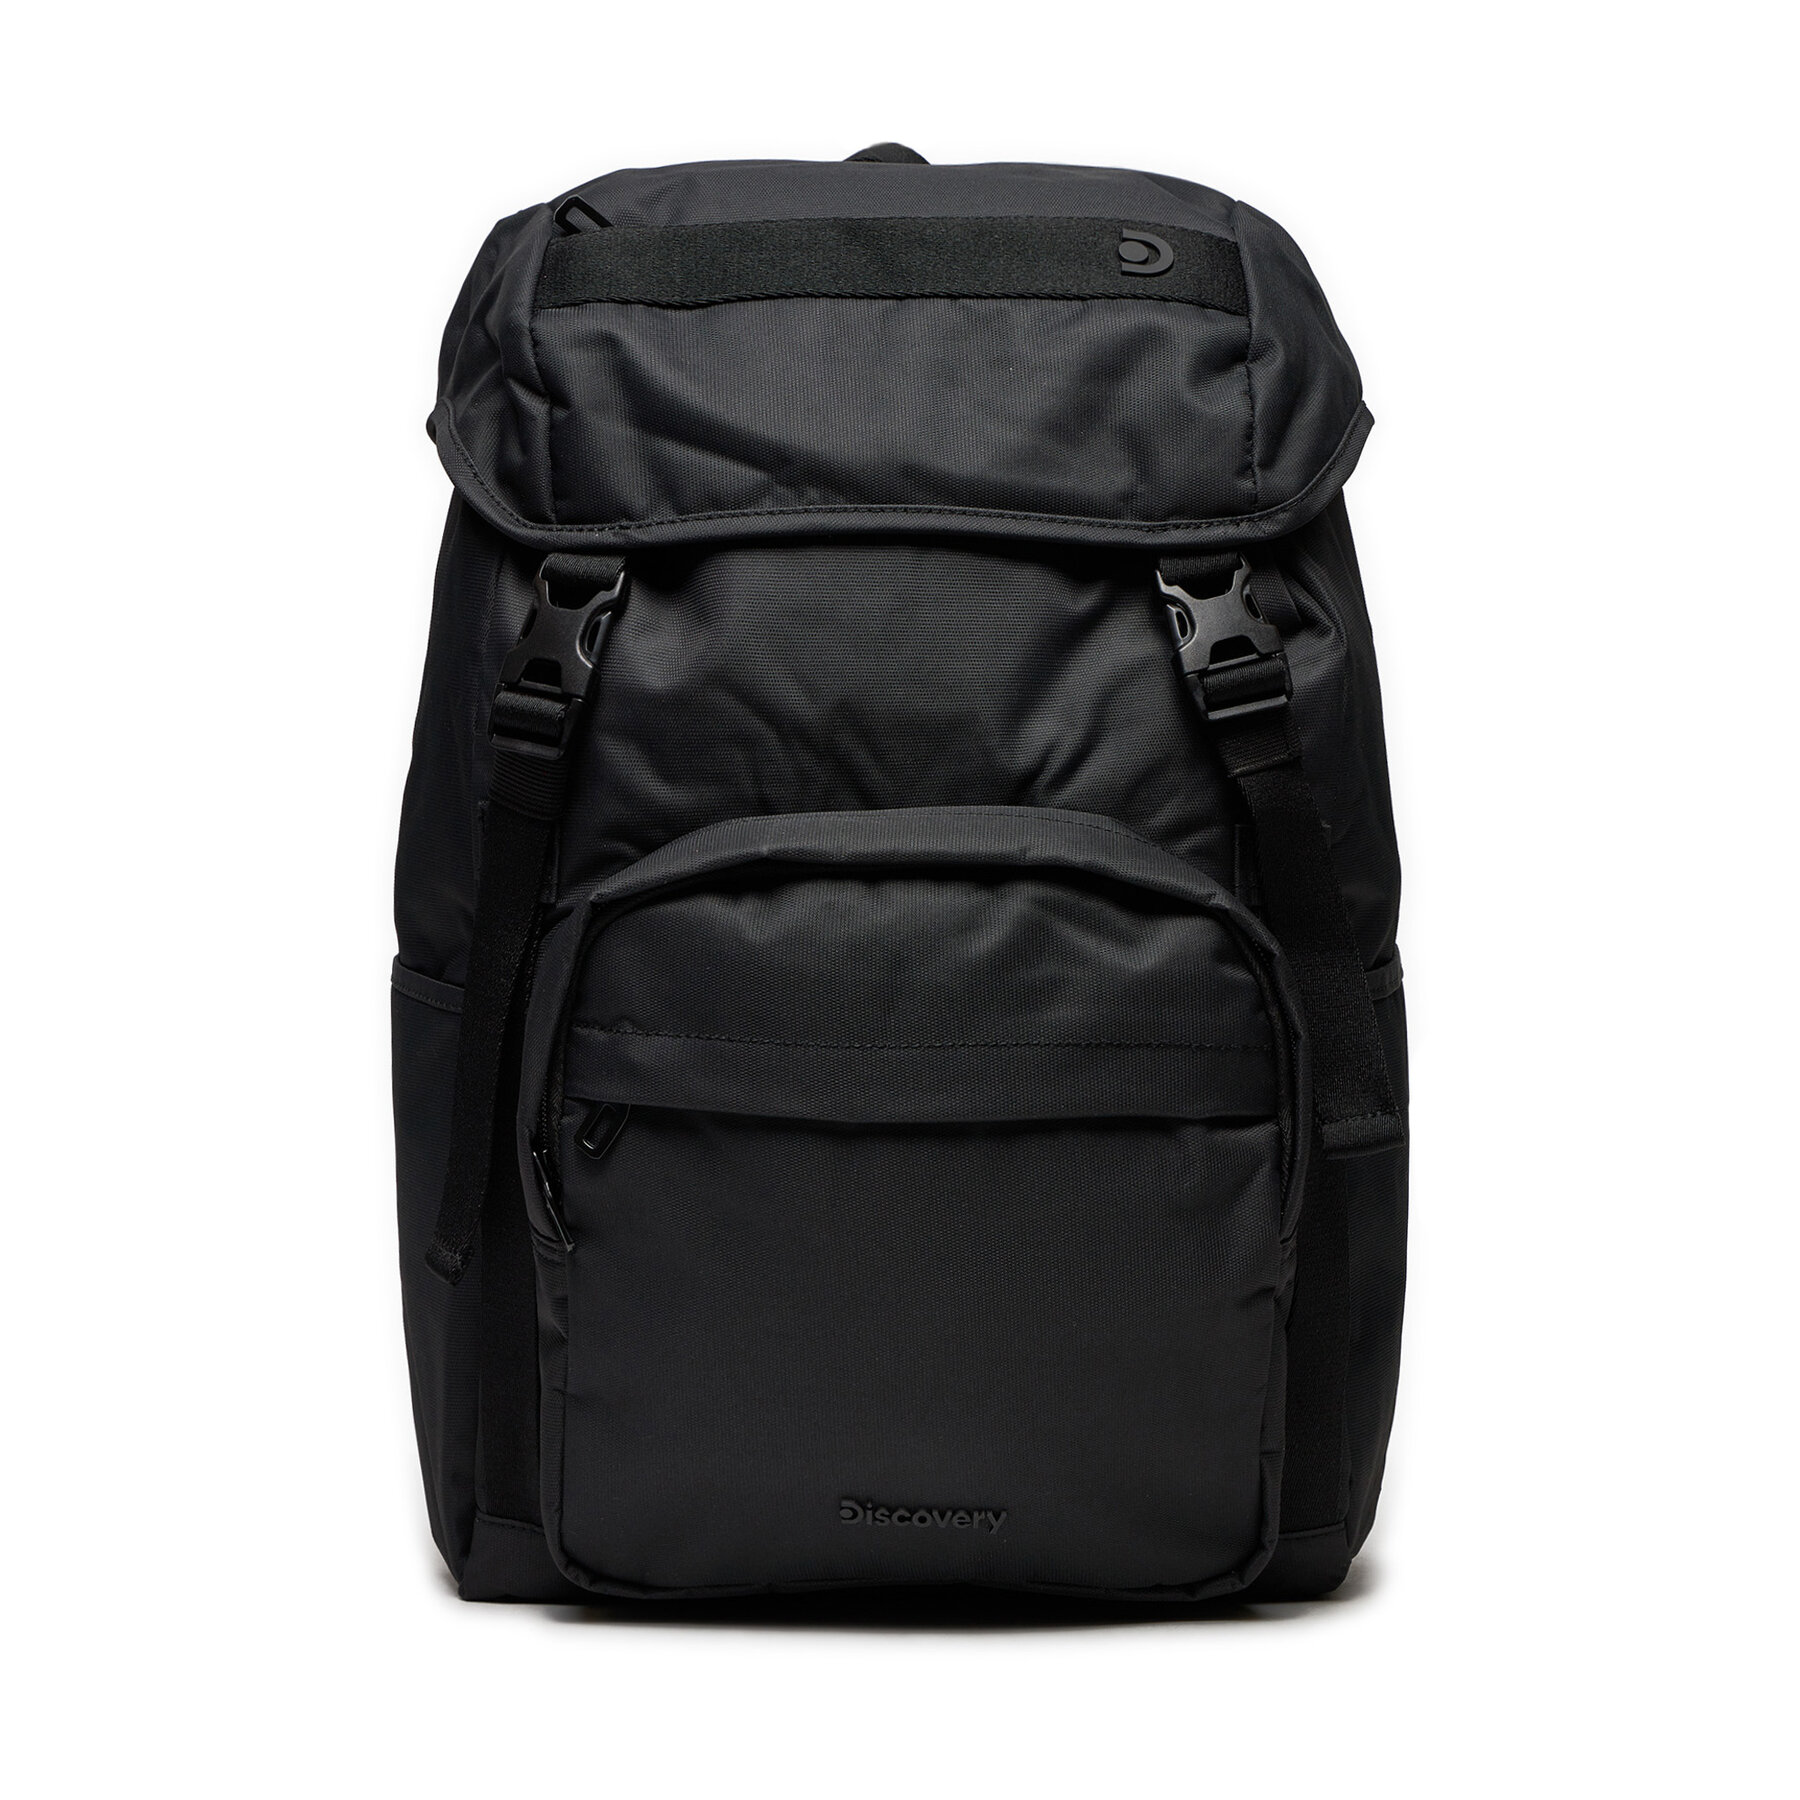 Rucksack Discovery Backpack D00943.06 Black von Discovery